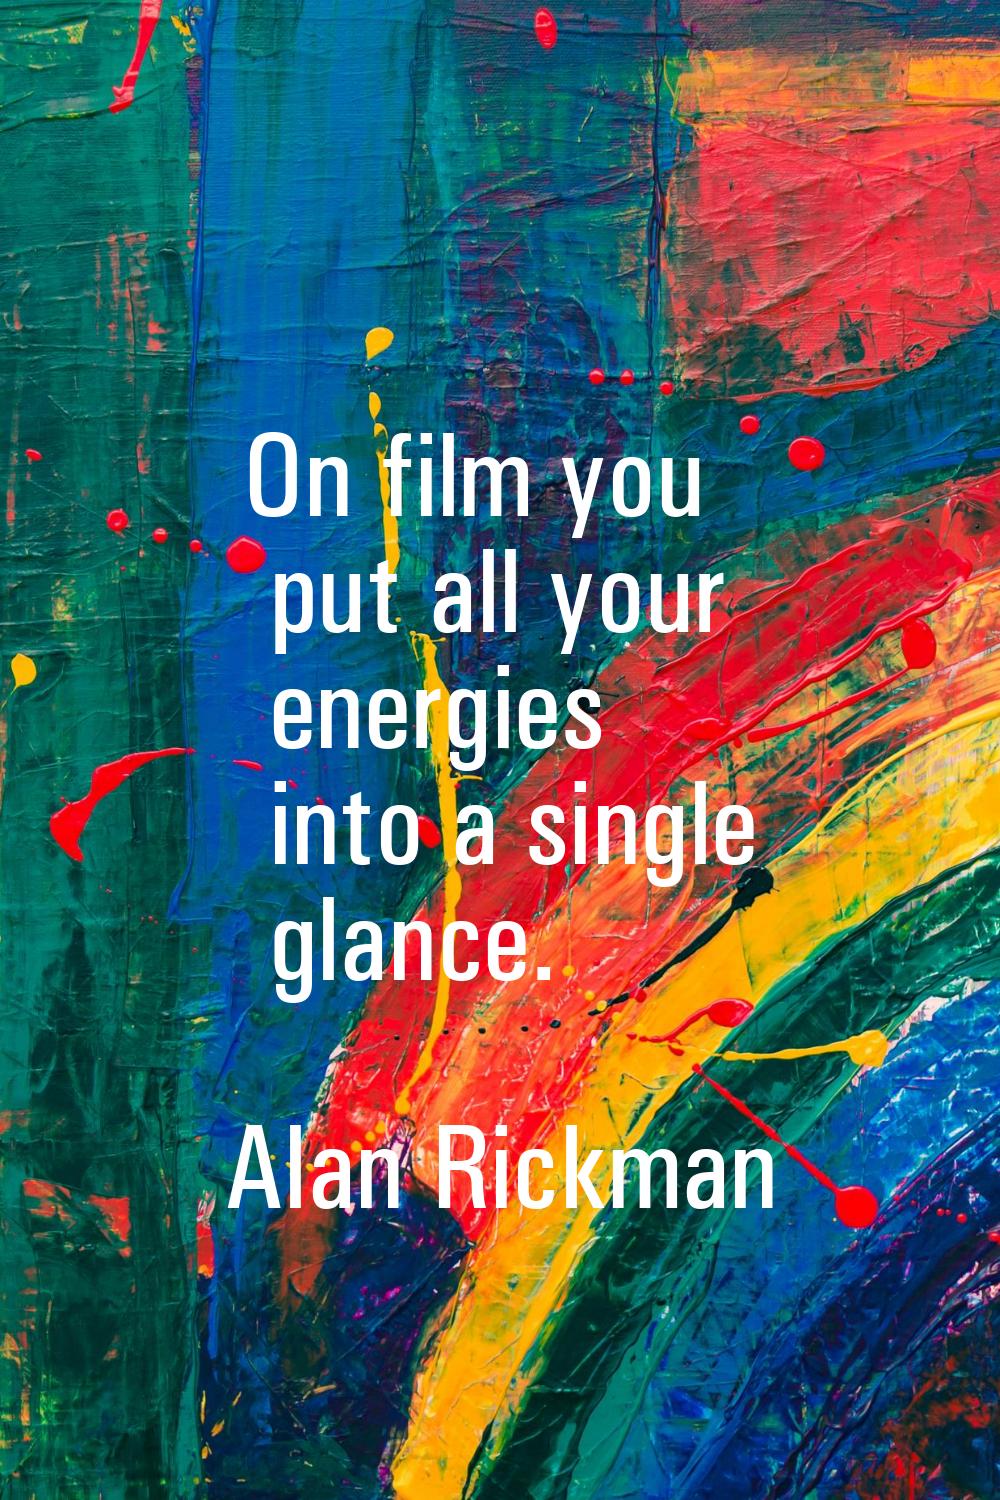 On film you put all your energies into a single glance.